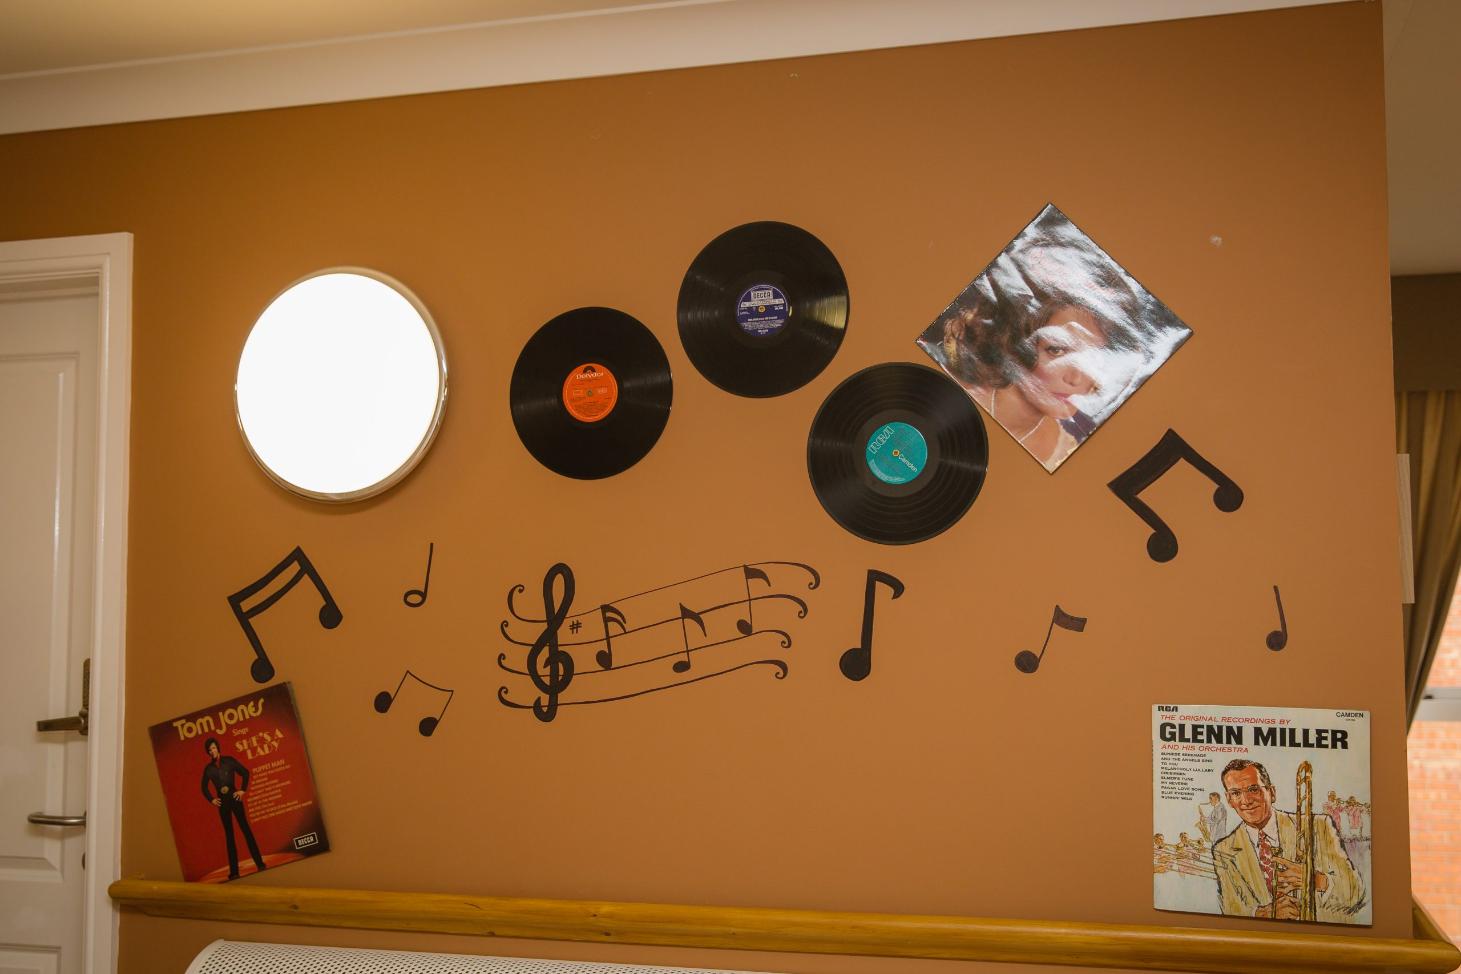 Orange wall decorated with music notes and vinyl records